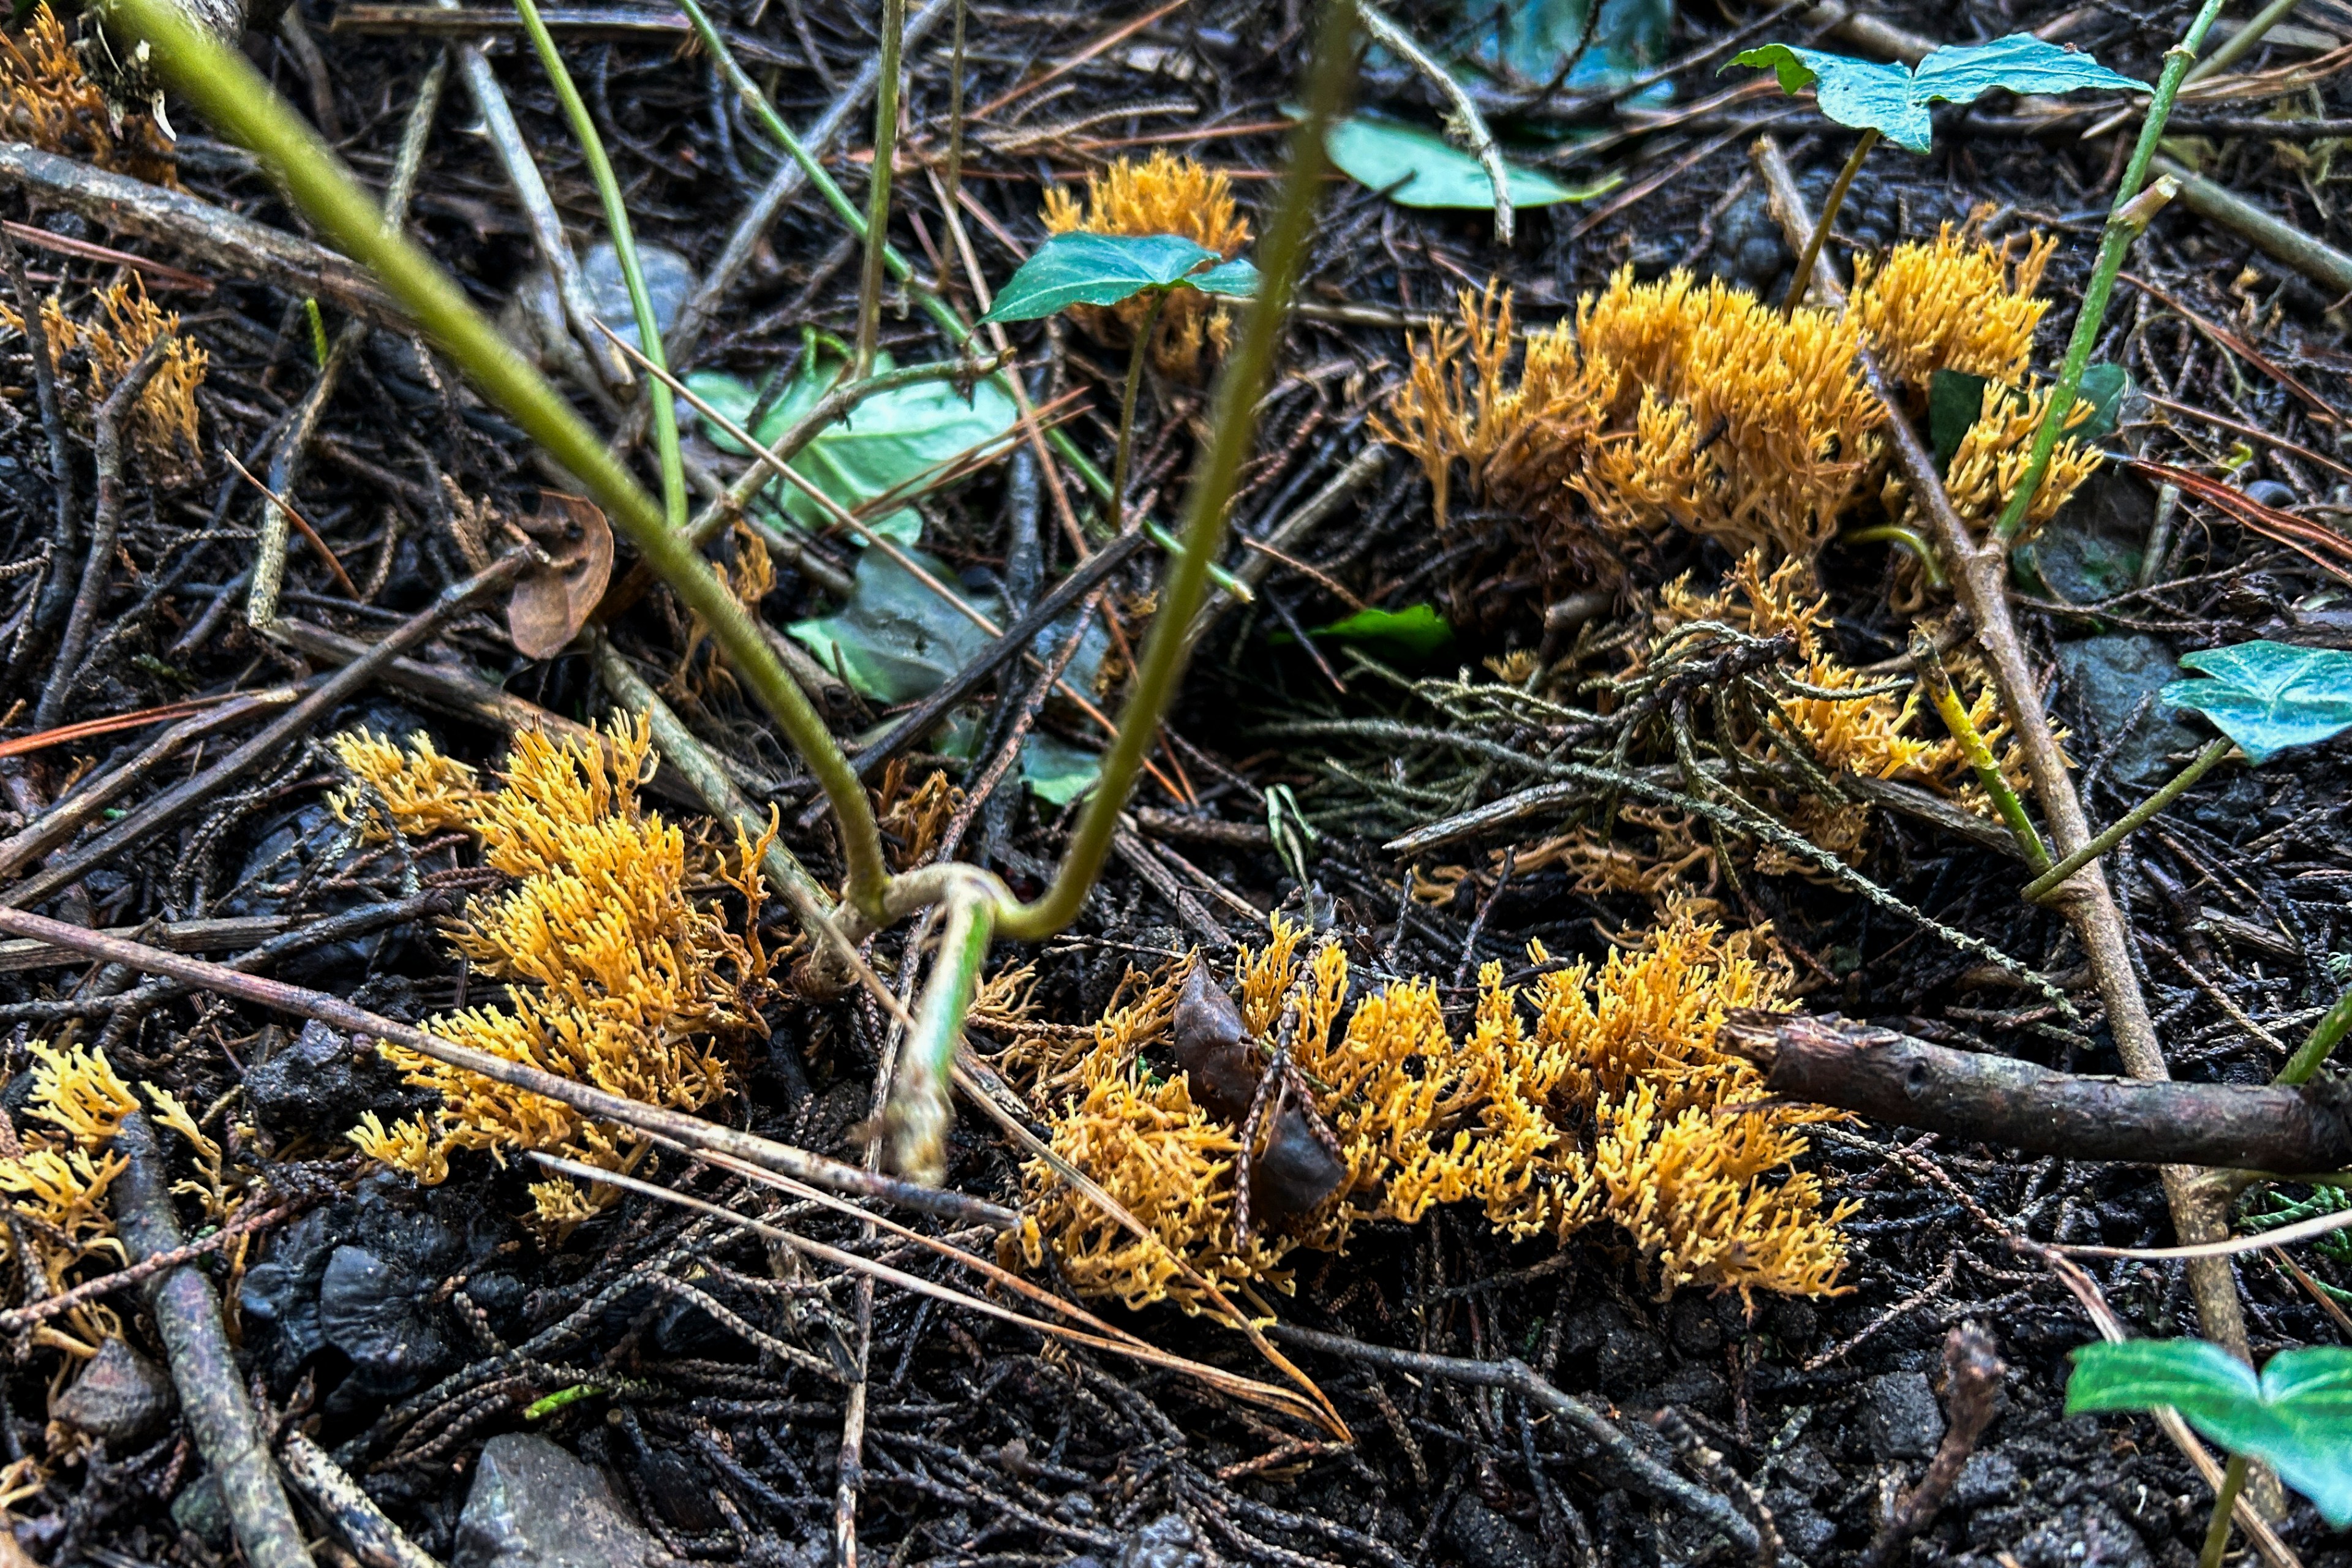 golden-colored coral mushrooms grow in patches on a forest floor